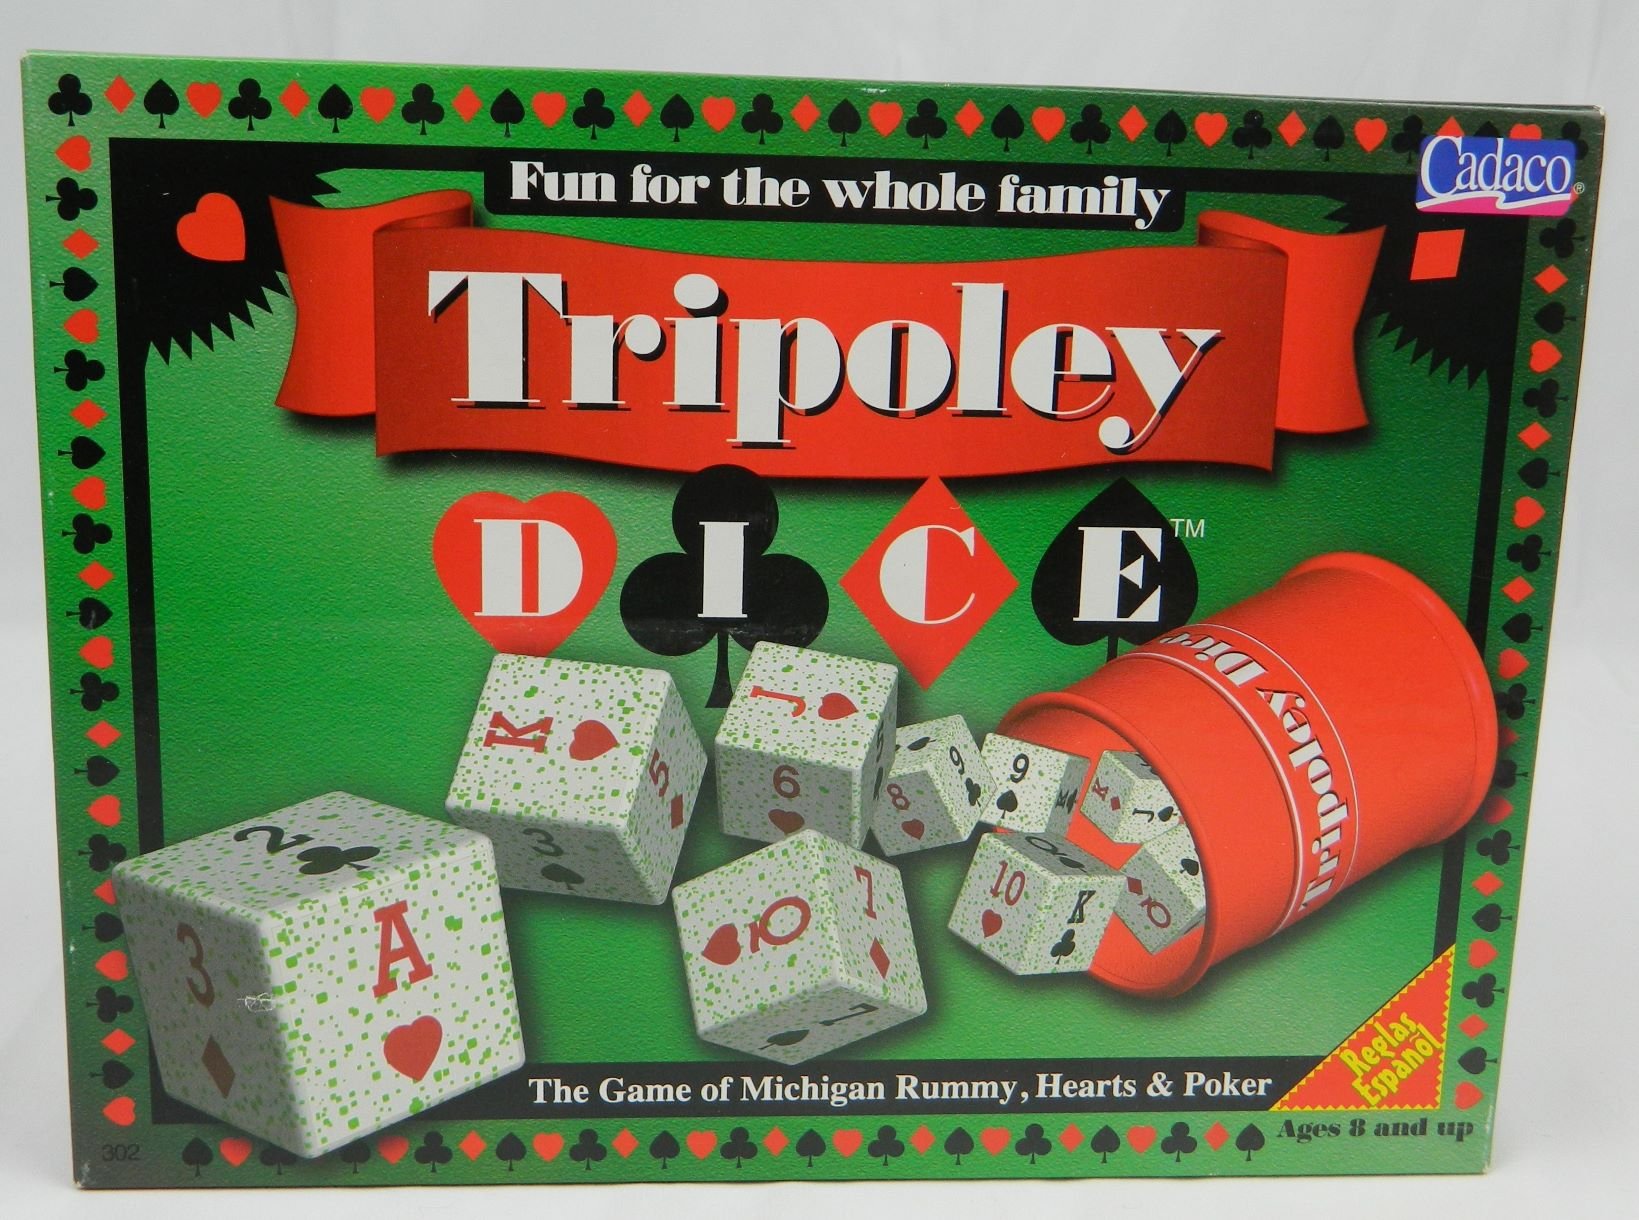 Box for Tripoley Dice